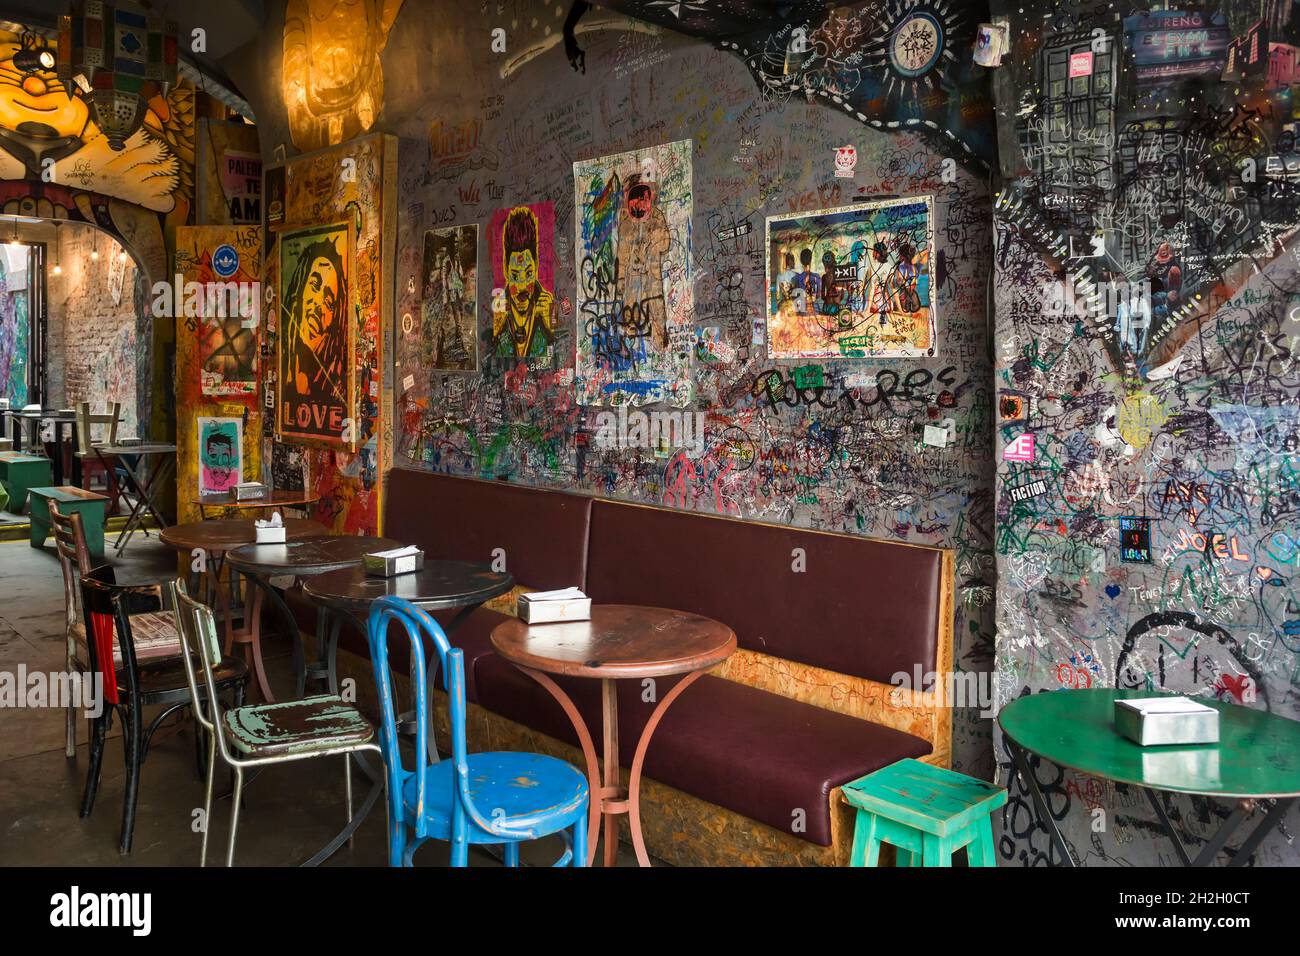 Horizontal view of a hippie bar interior in Jorge Luís Borges St, Palermo neighborhood, Buenos Aires, Argentina Stock Photo